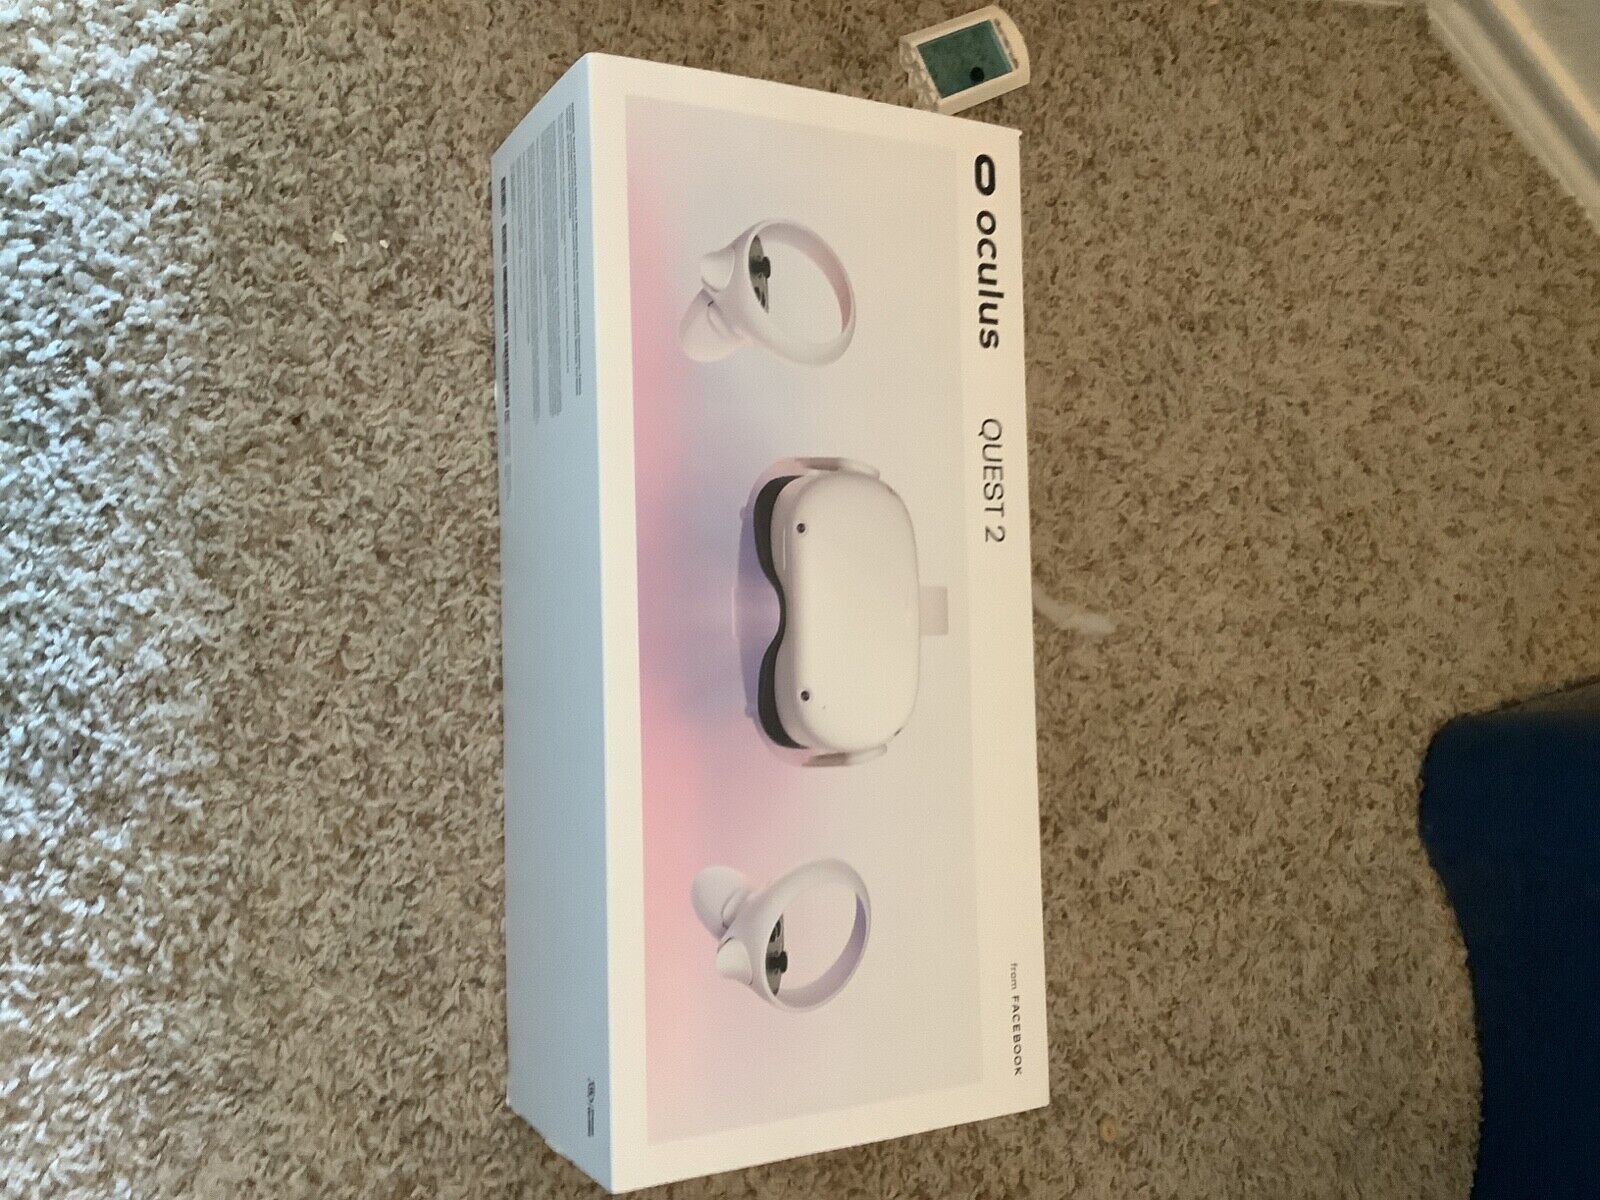 Long Beach Mall Oculus Quest 2 128GB All-in-one VR White Headset gr comes with - Phoenix Mall